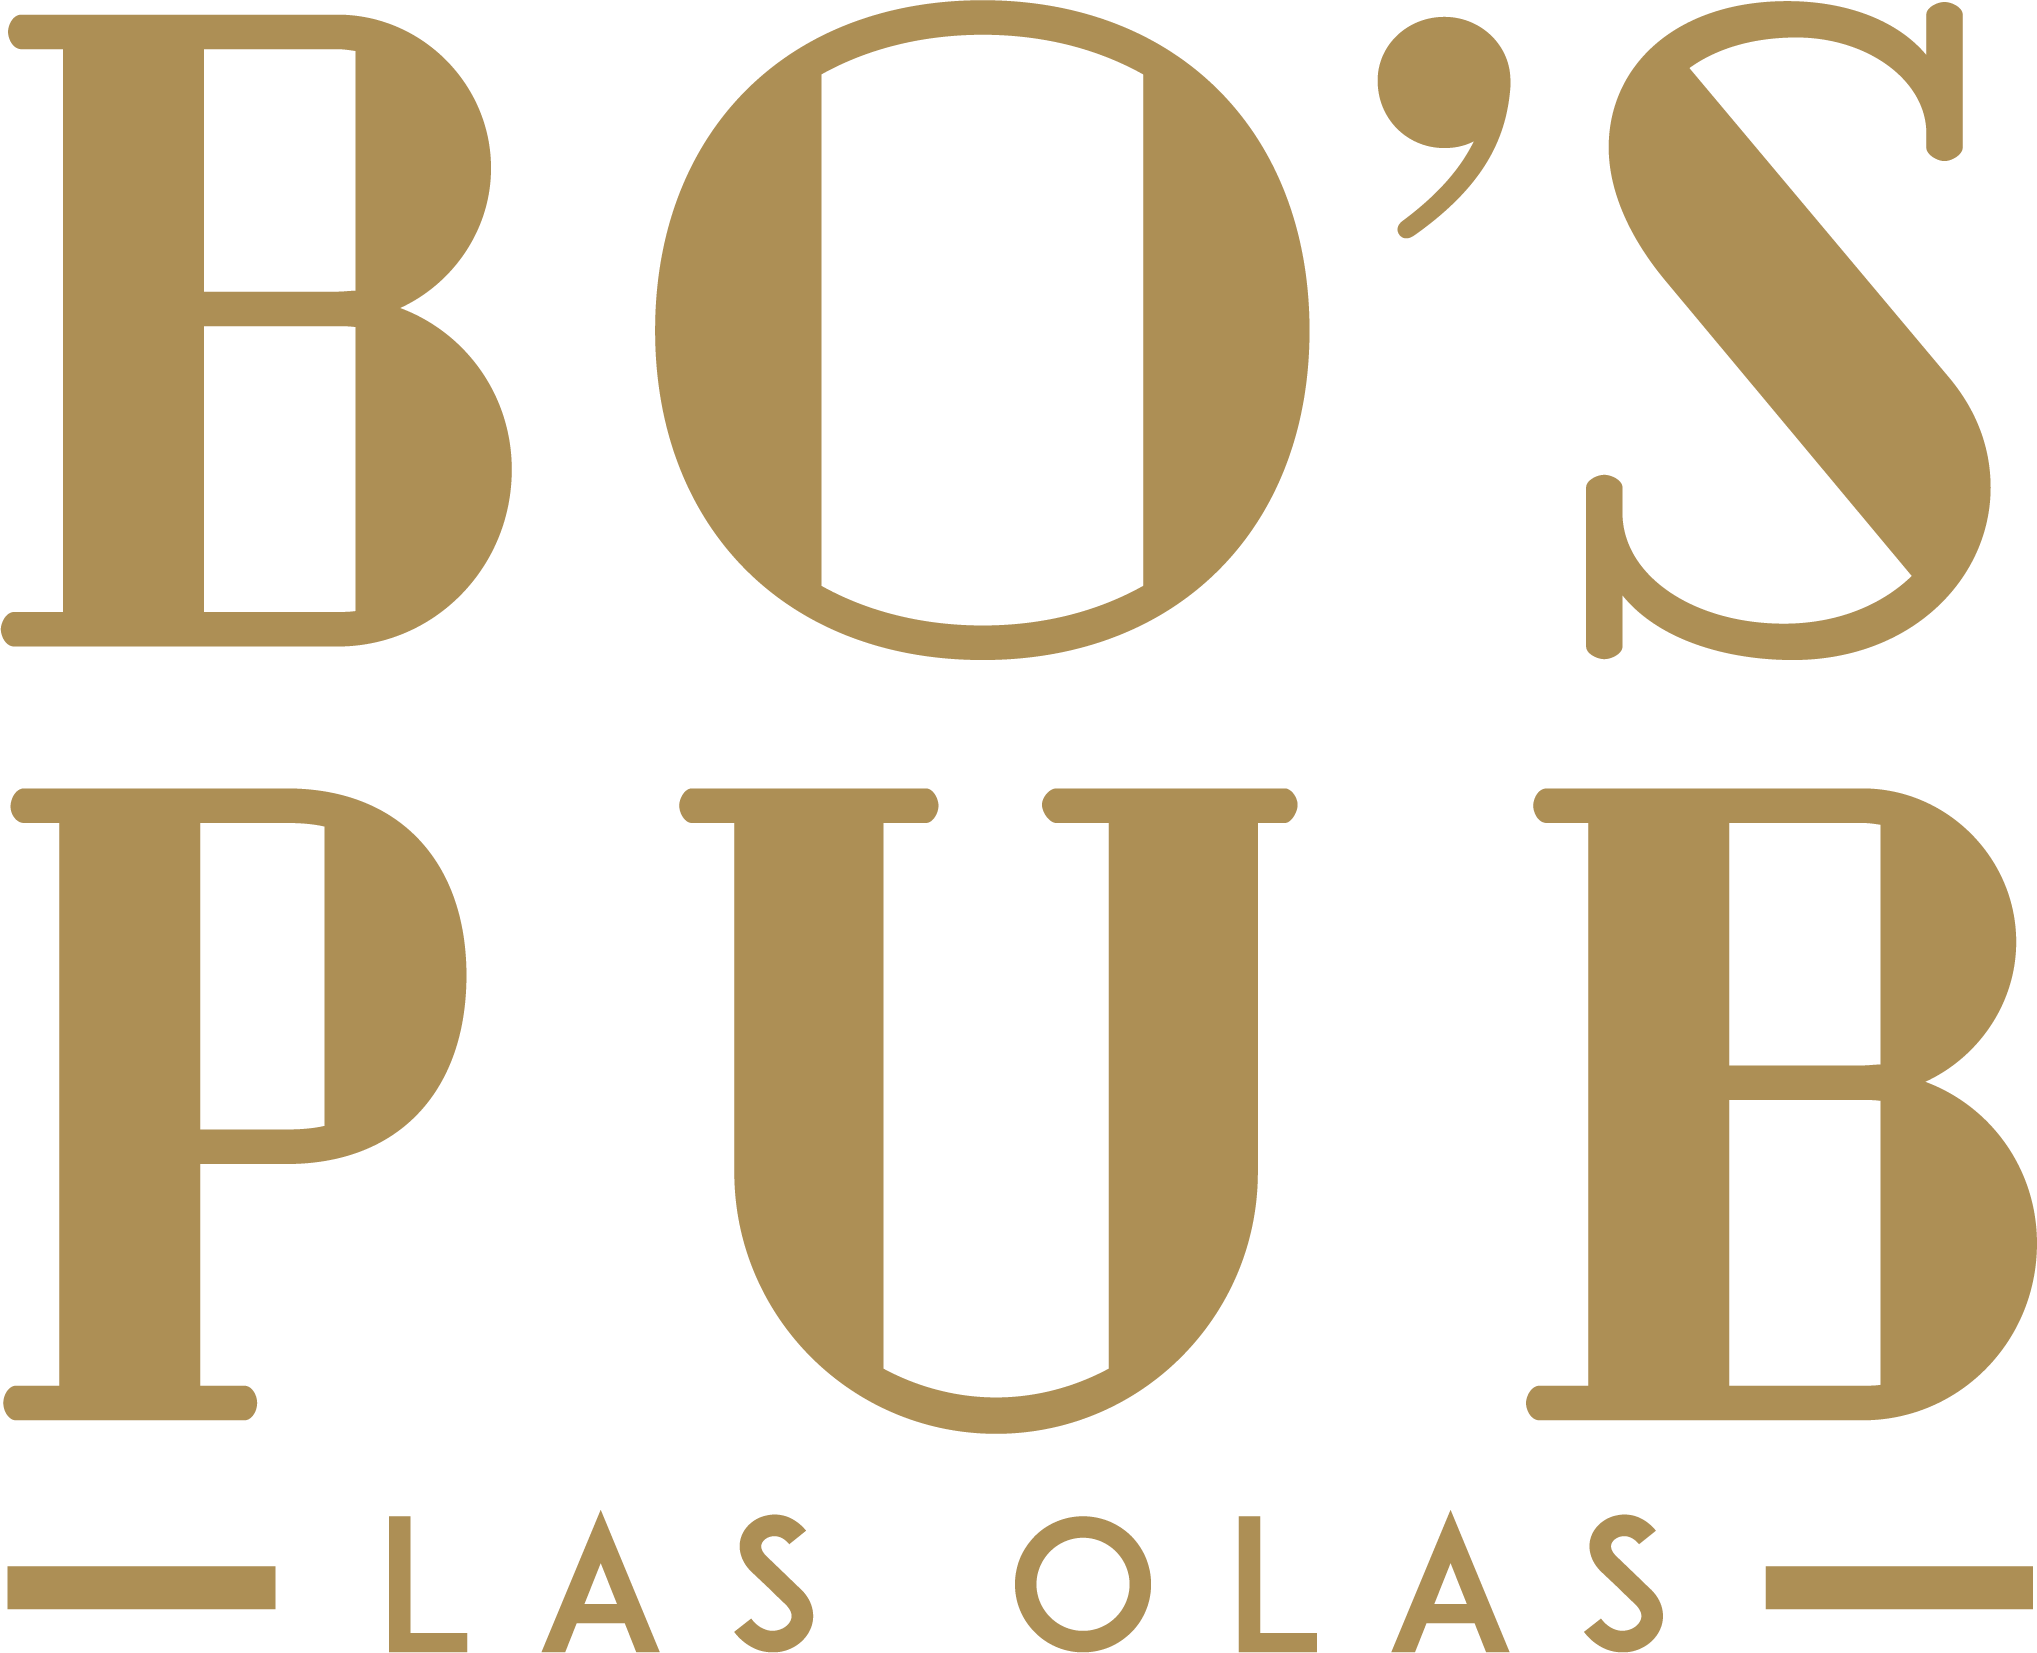 Bo's Pub is an award-winning stylish sports bar and live music venue located on Las Olas Blvd in Fort Lauderdale, Florida.